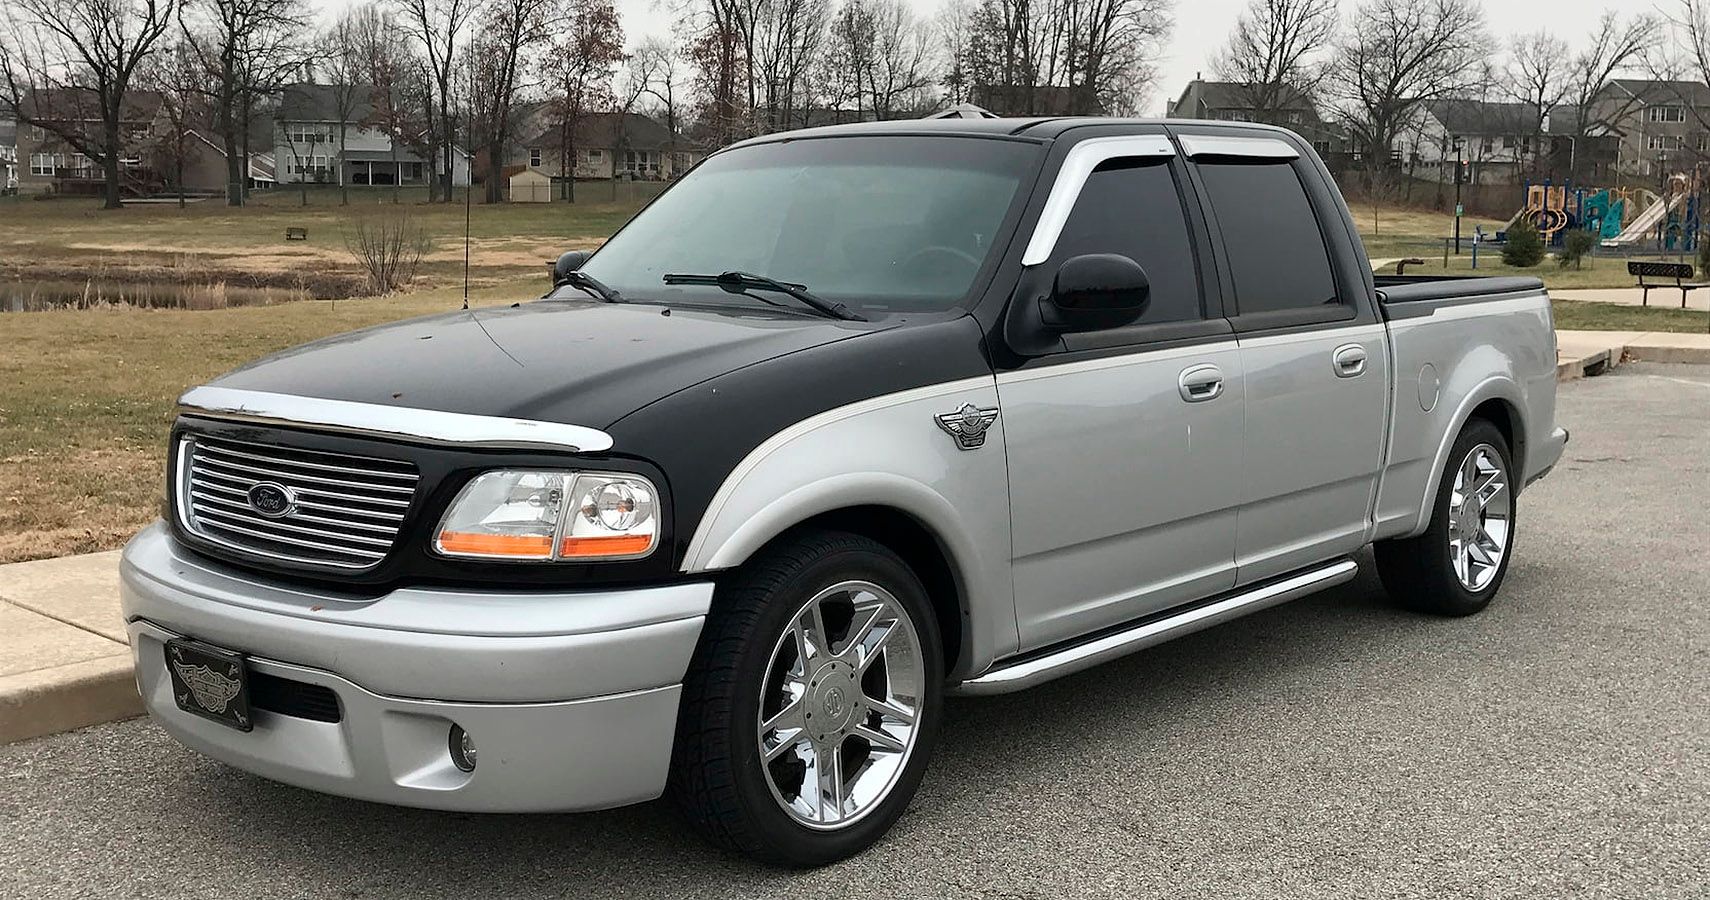 Two Positives Make Something Awesome: 2003 Ford F-150 Harley Davidson